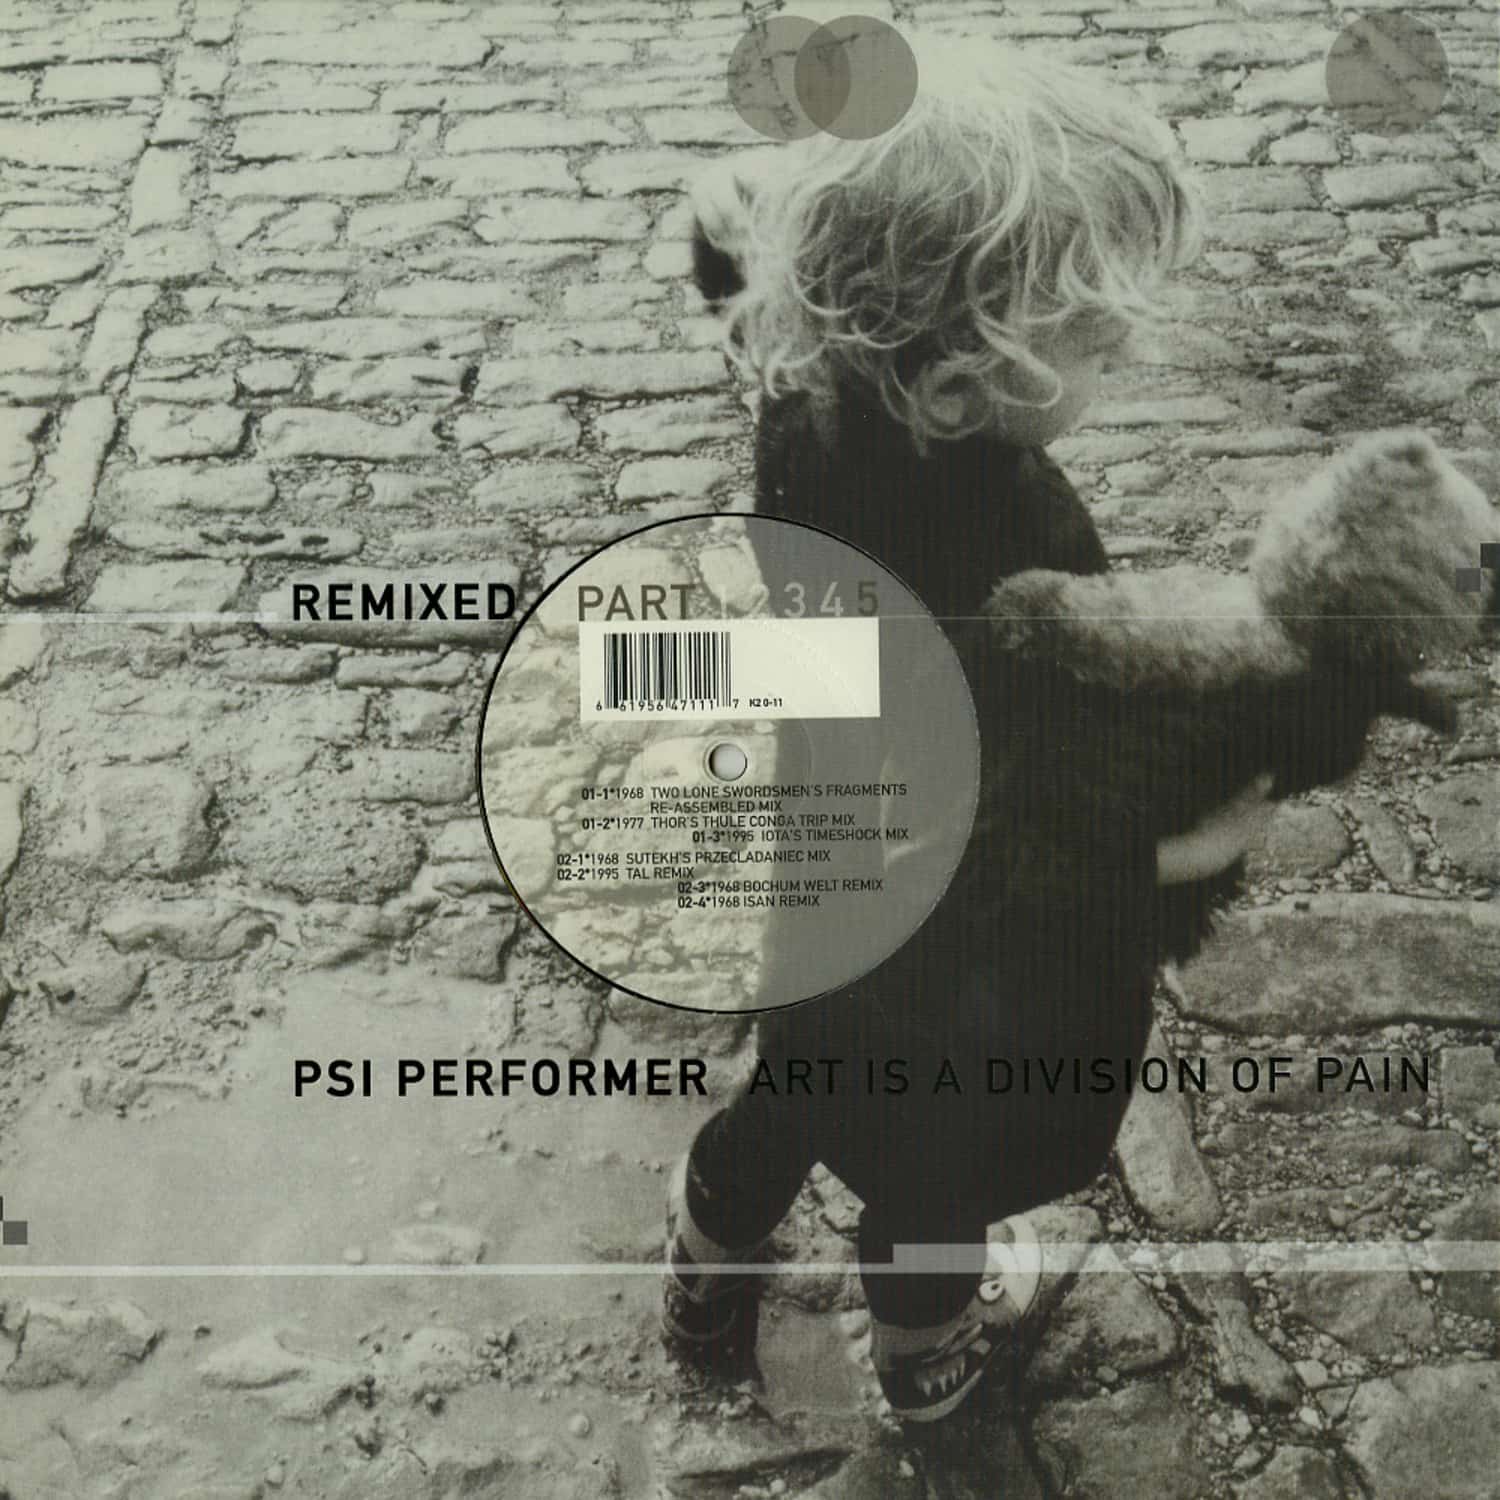 PSI Performer - ART IS A DIVISION OF PAIN REMIXED PT. 5